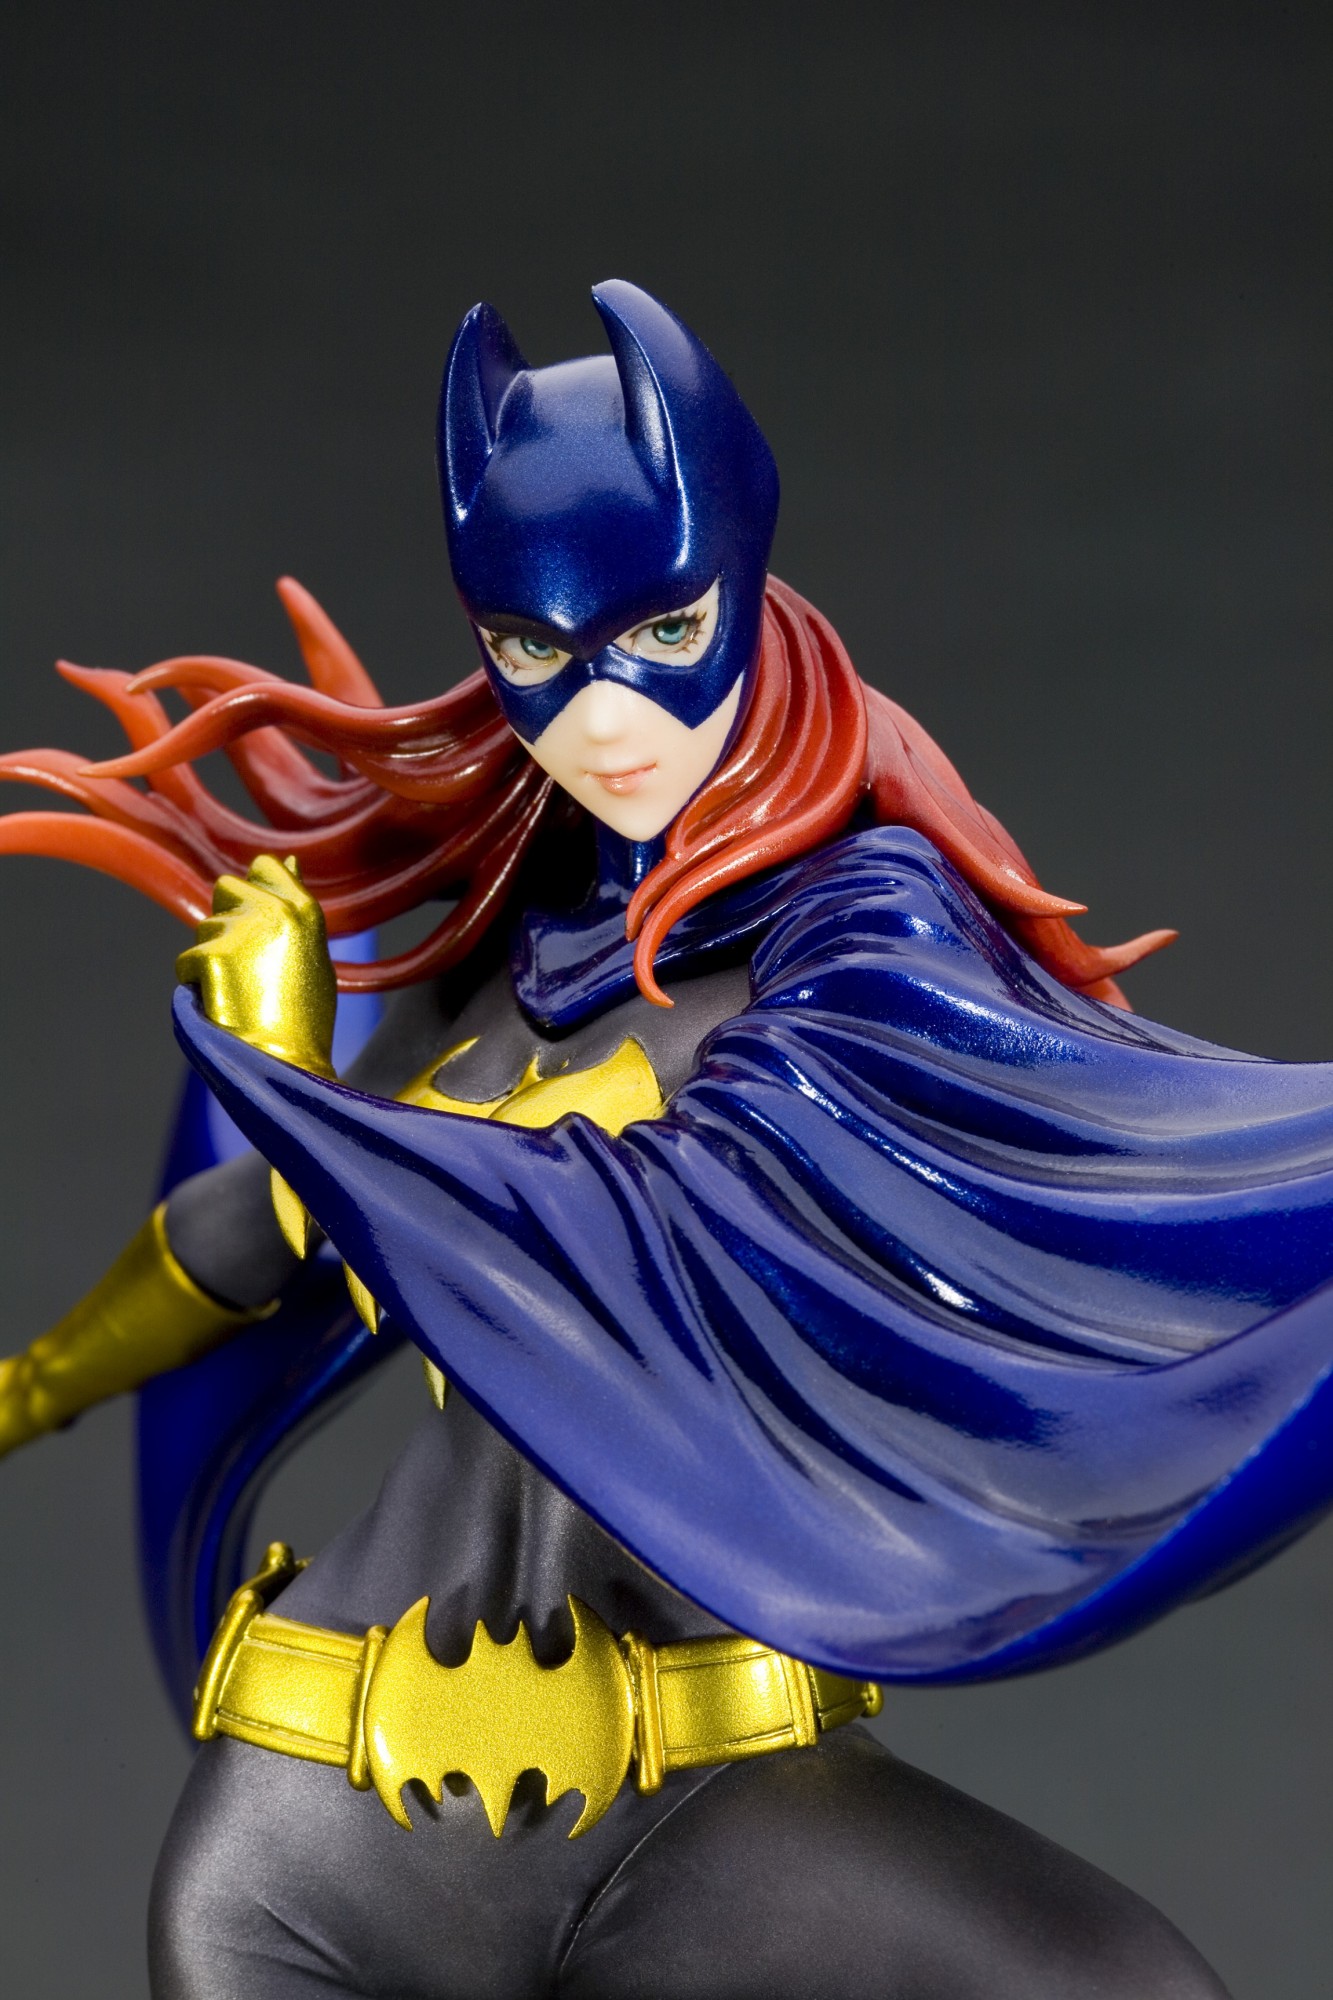 Batgirl Is Here to Save the Day and Look Stunning, Too1333 x 2000